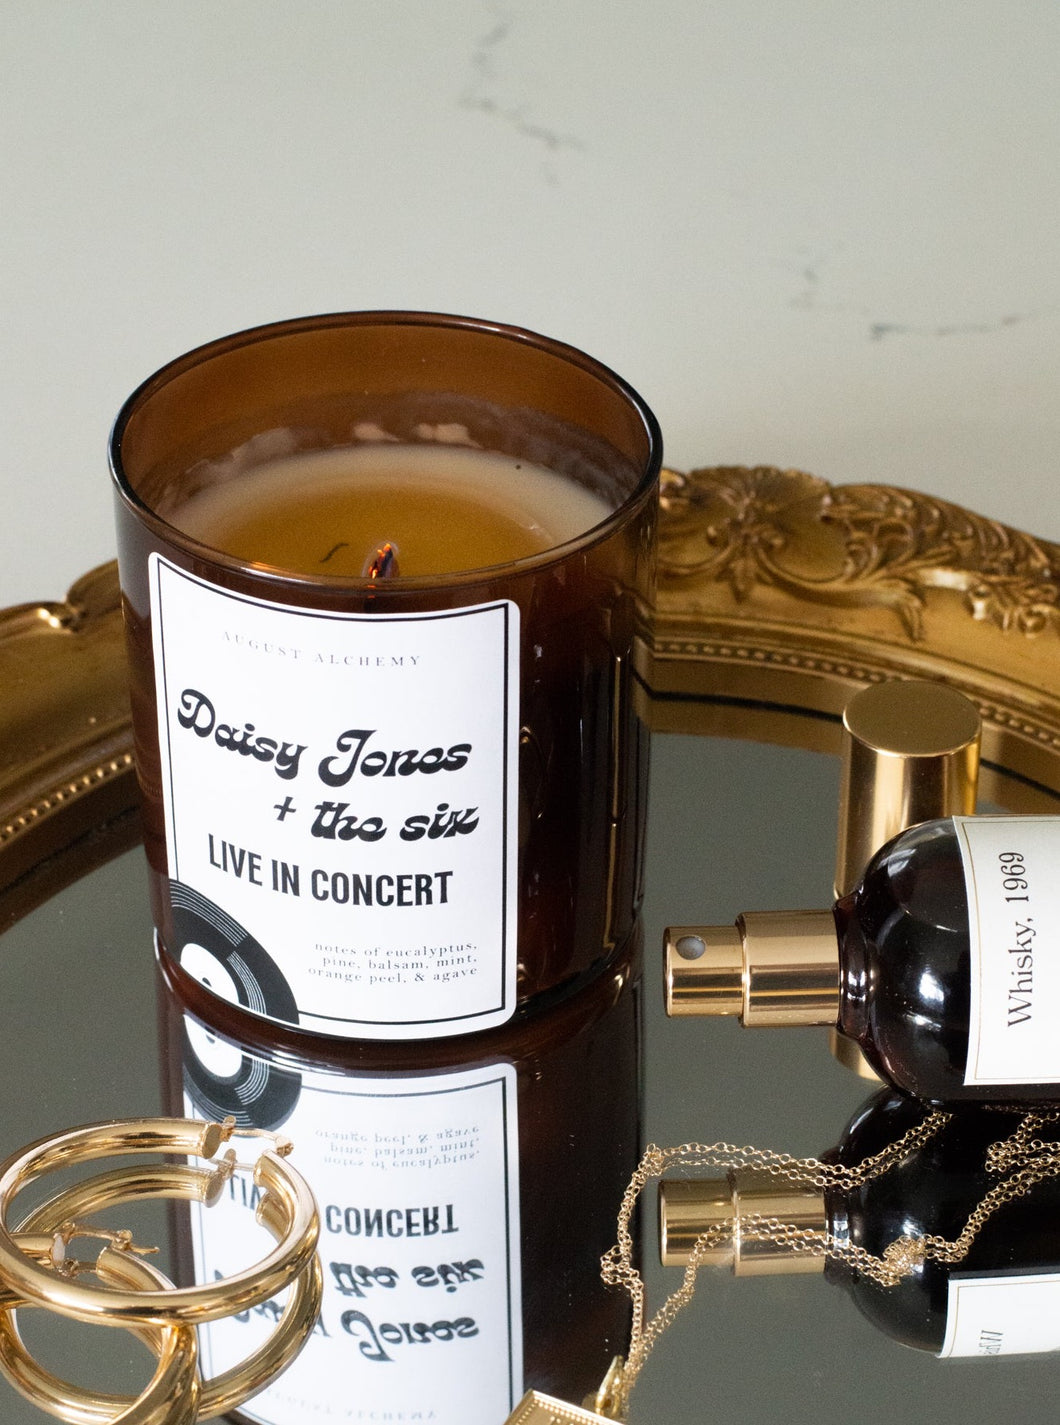 Live In Concert Candle